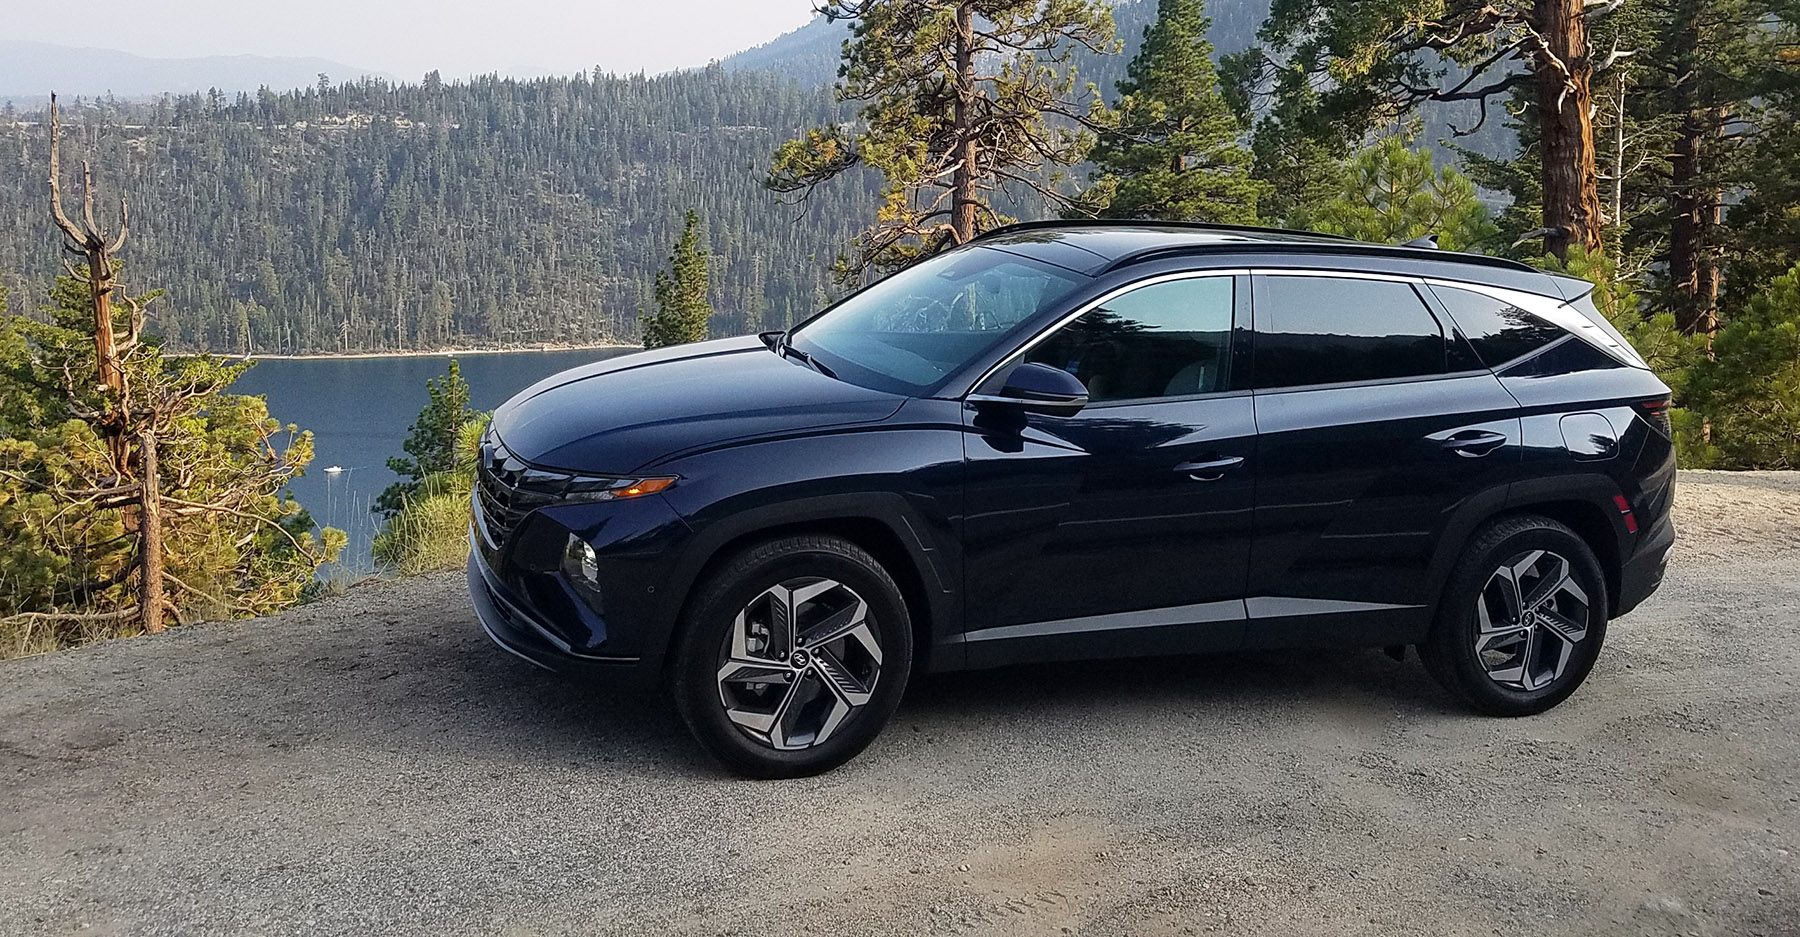 Vacation Test Drive: 2022 Hyundai Tucson Limited Hybrid | The Daily Drive |  Consumer Guide® The Daily Drive | Consumer Guide®